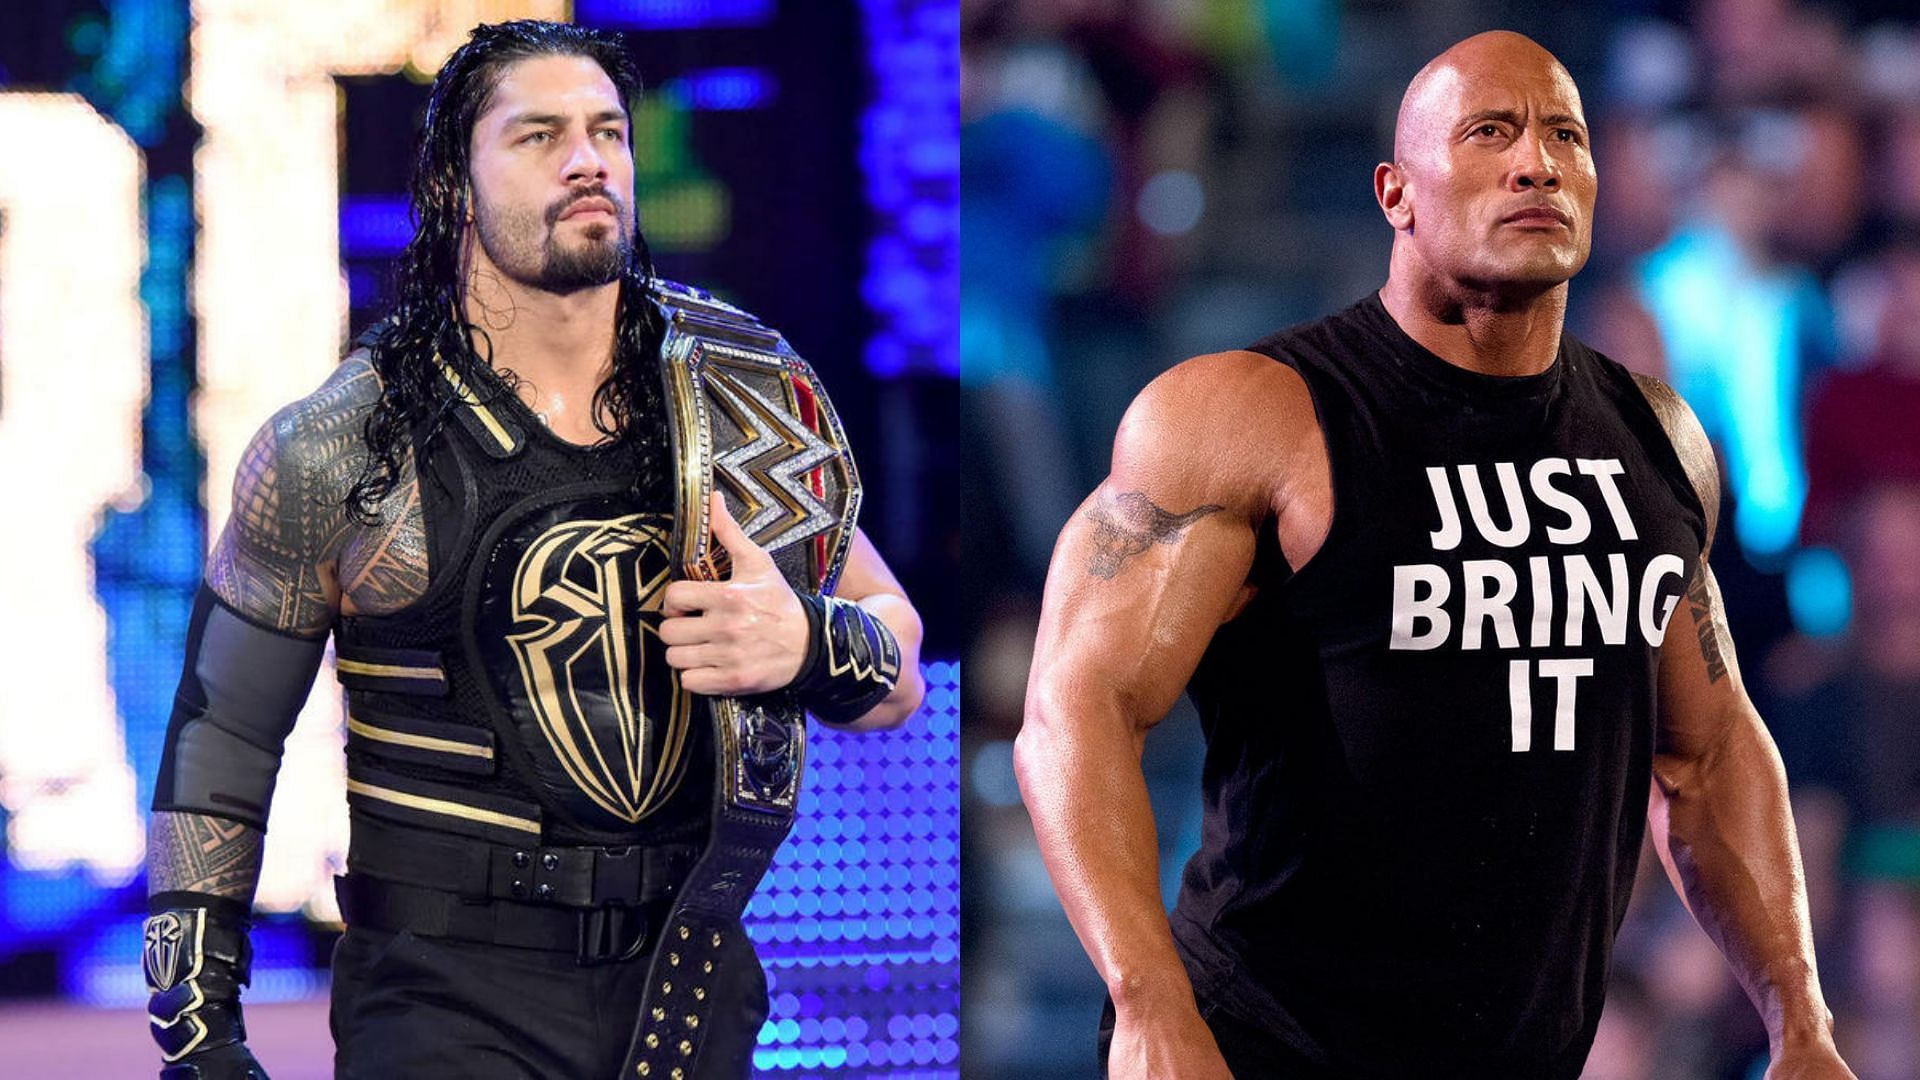 Reigns vs Rock: A clash for the ages